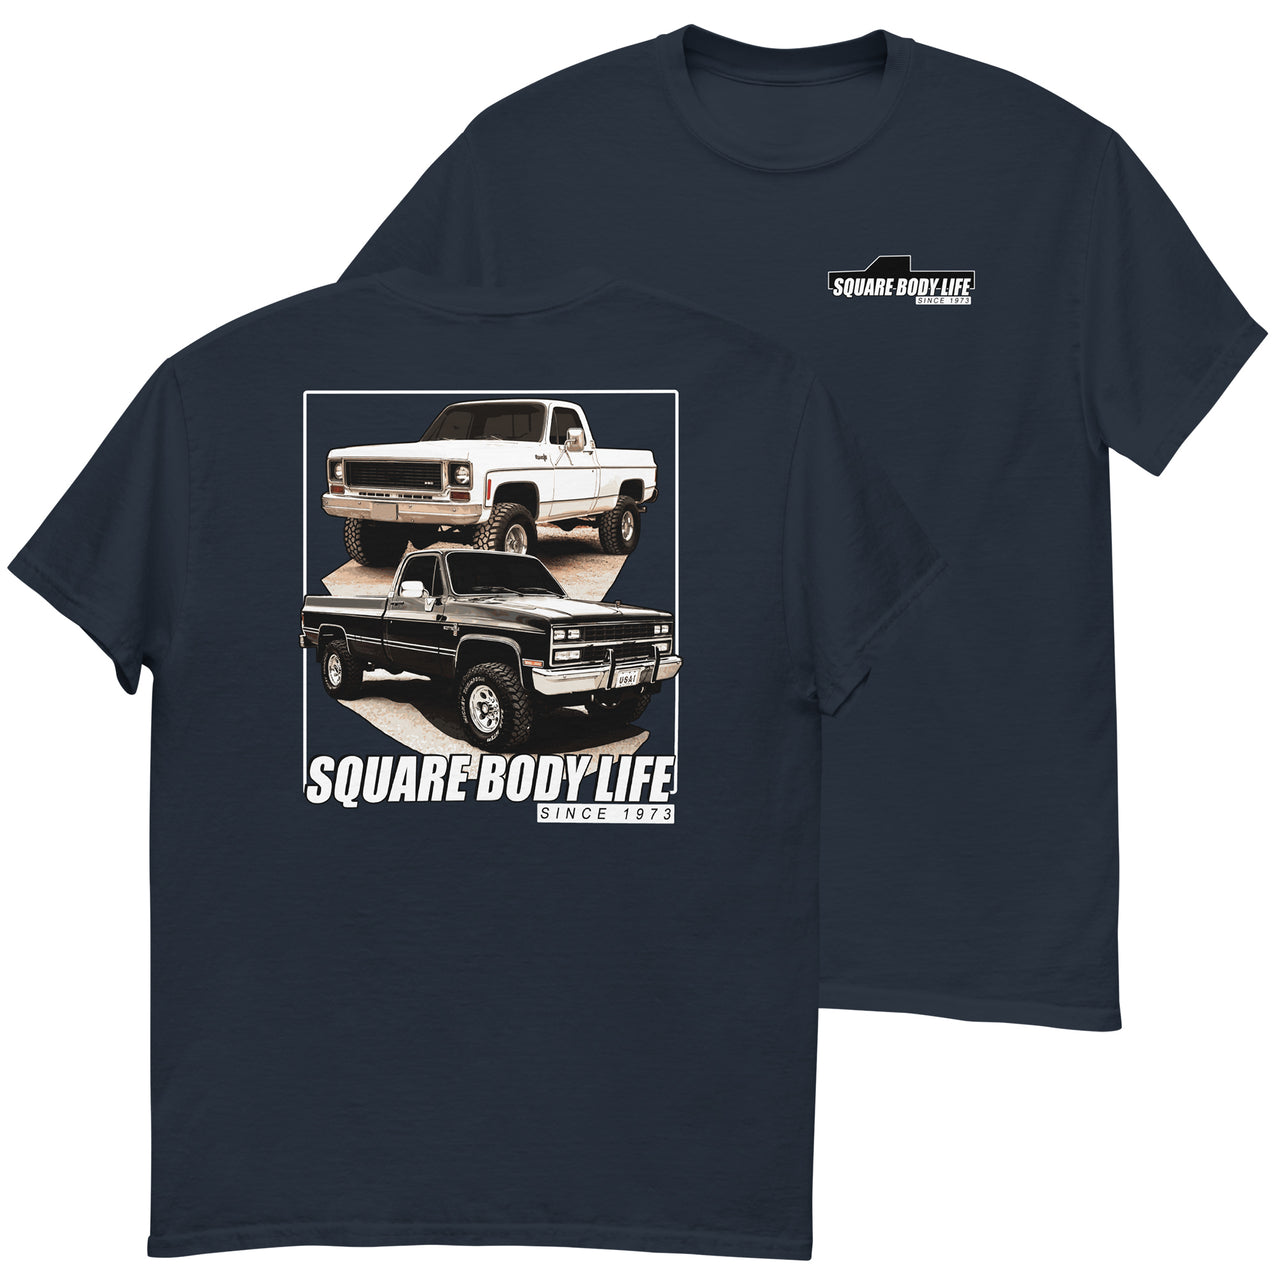 Square Body Life T-Shirt in navy